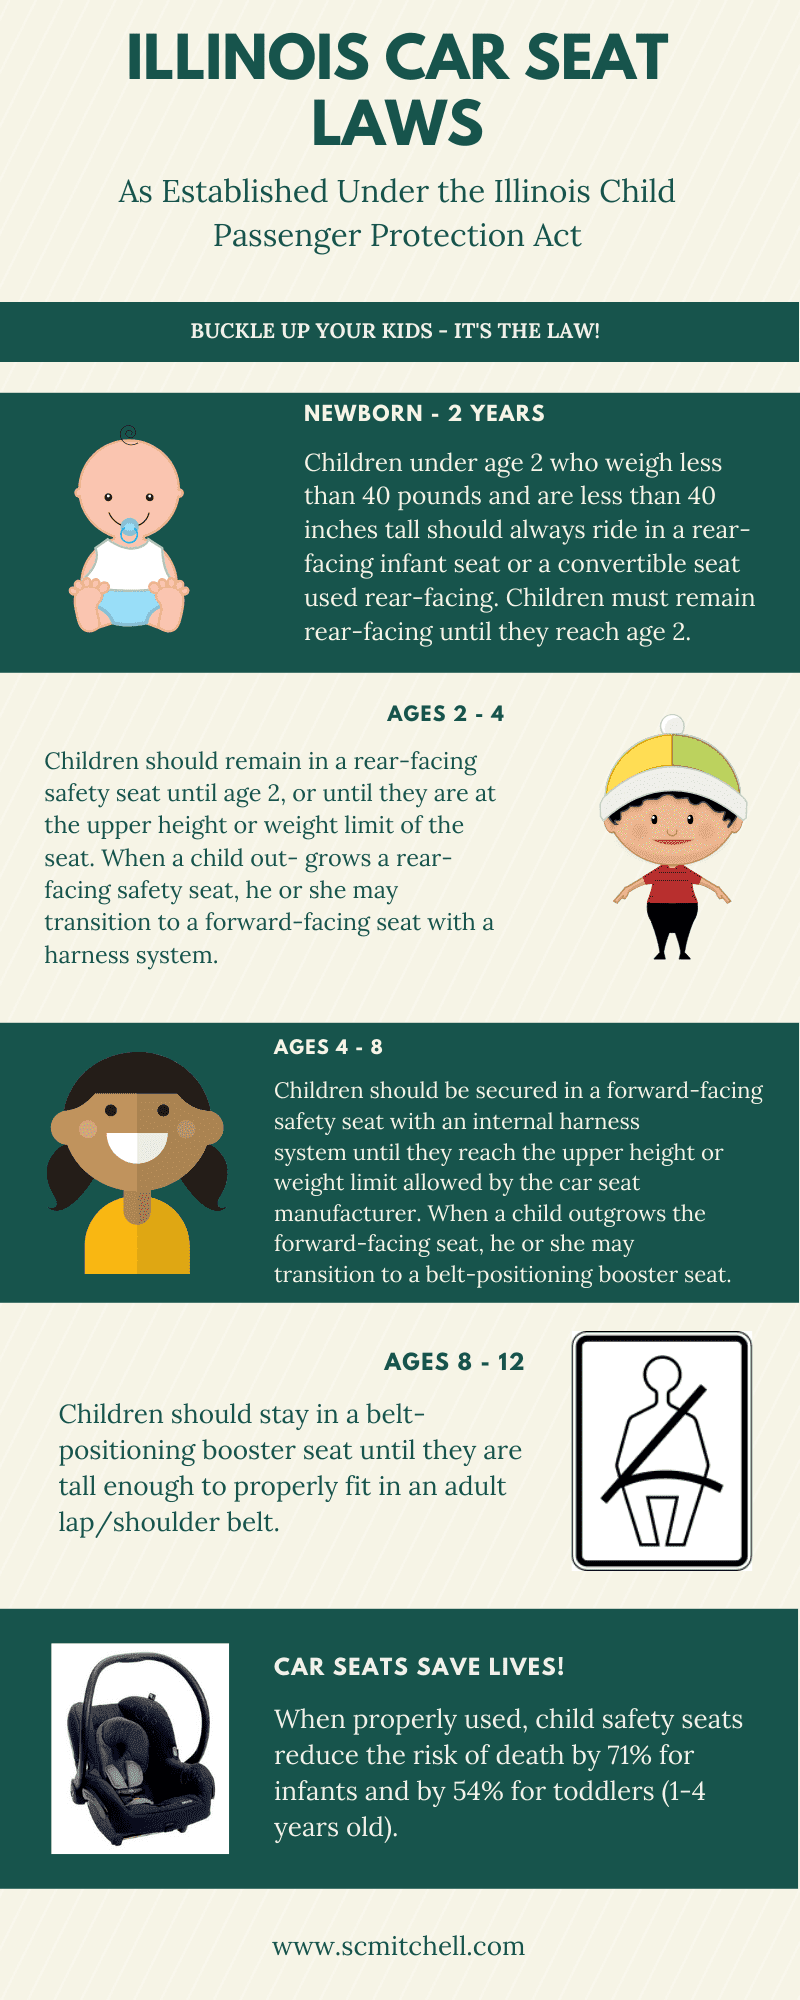 Illinois Car Seat Laws Infographic